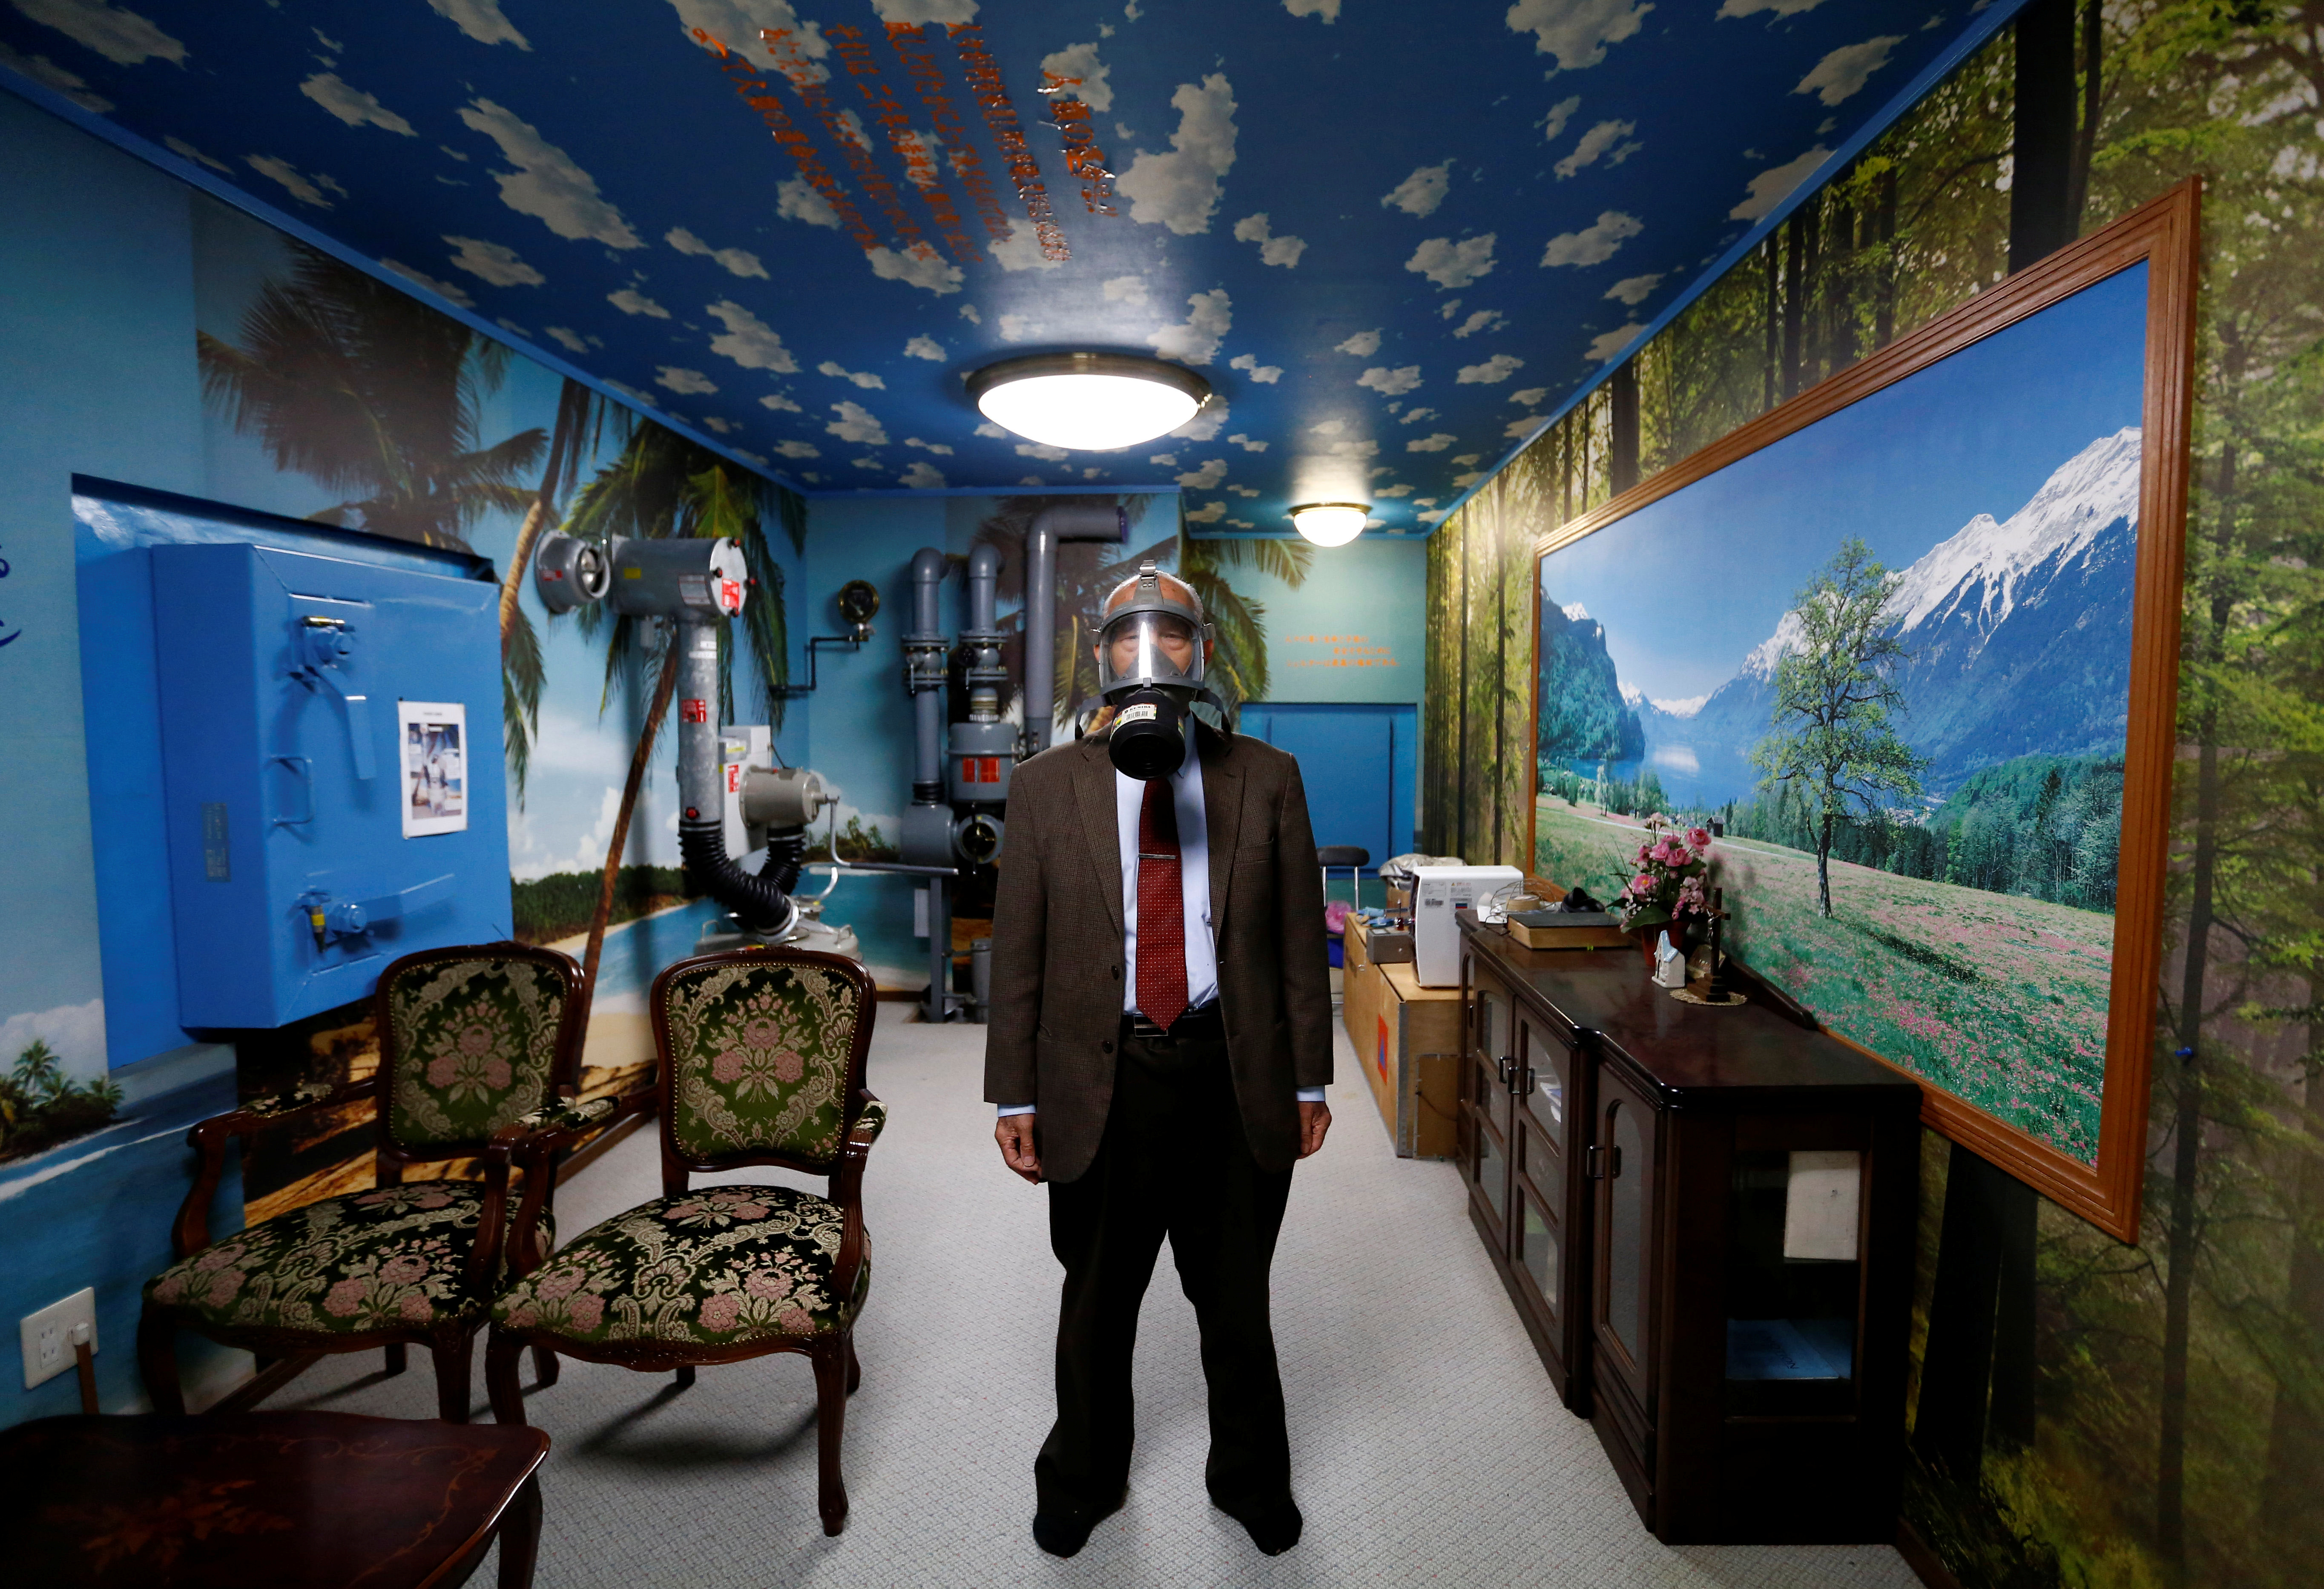 Seiichiro Nishimoto, CEO of Shelter Co., poses in his company-built nuclear shelter in his basement in Osaka, Japan.